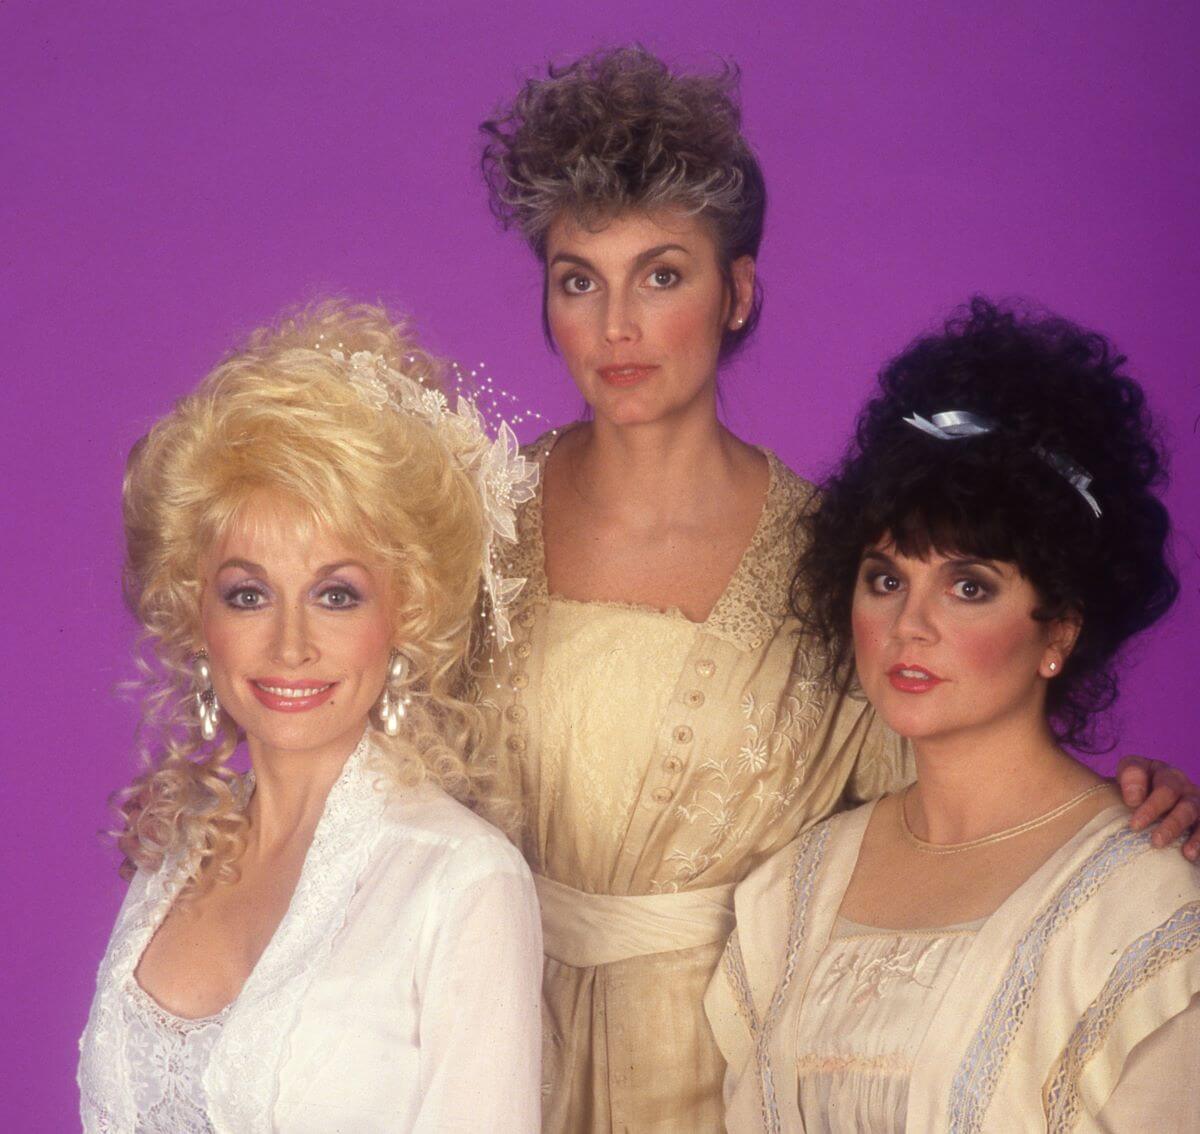 Dolly Parton, Emmylou Harris, and Linda Ronstadt pose against a purple background. Harris stands between Parton and Ronstadt, who sit.